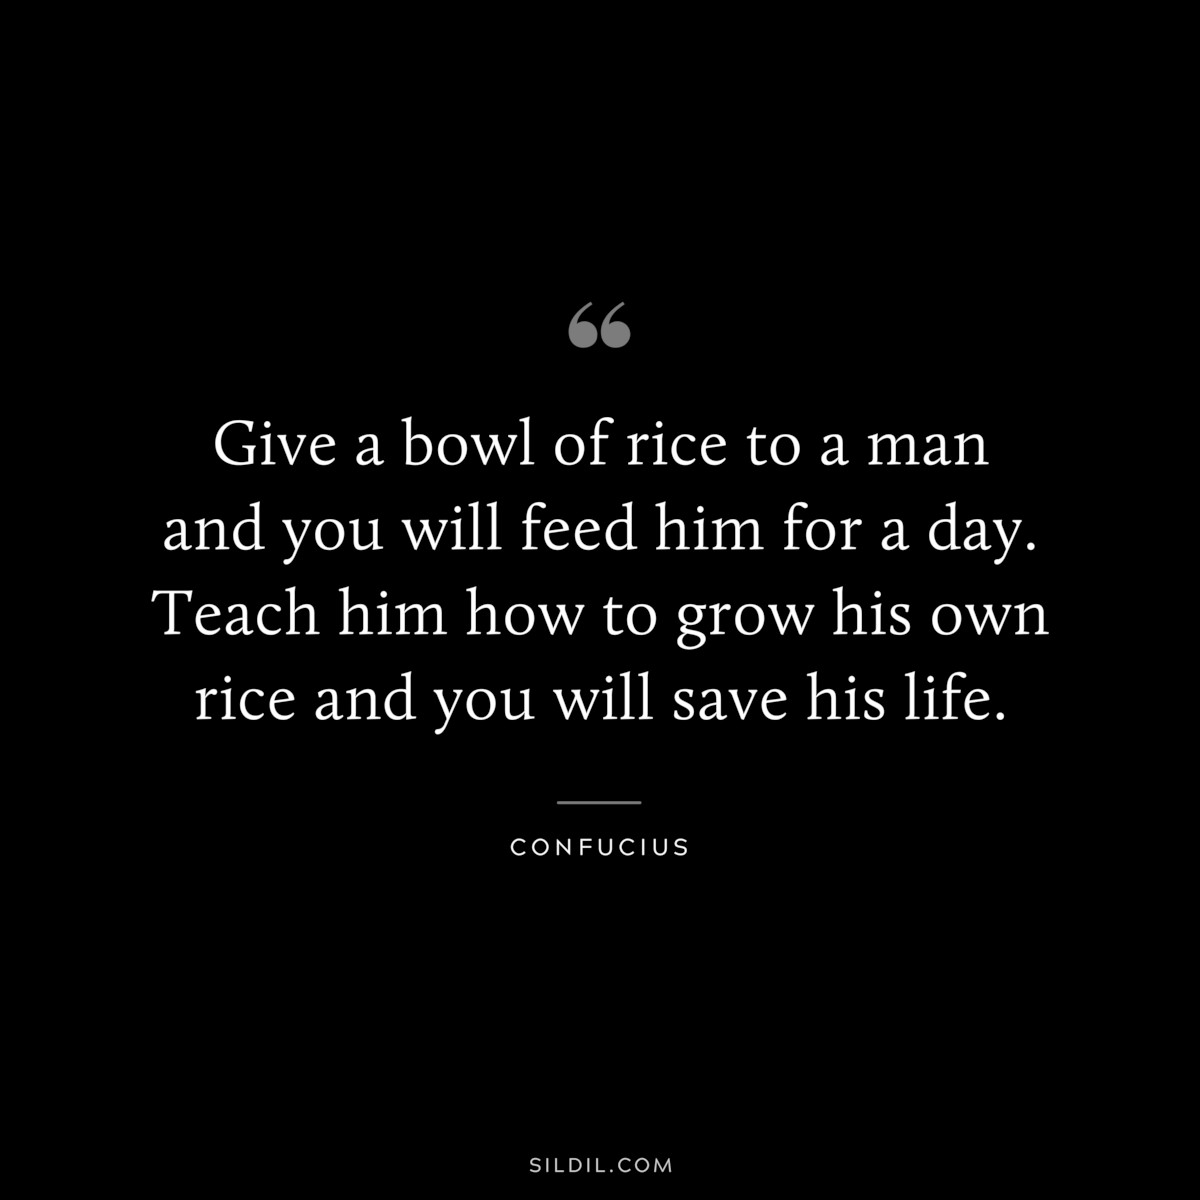 Give a bowl of rice to a man and you will feed him for a day. Teach him how to grow his own rice and you will save his life. ― Confucius